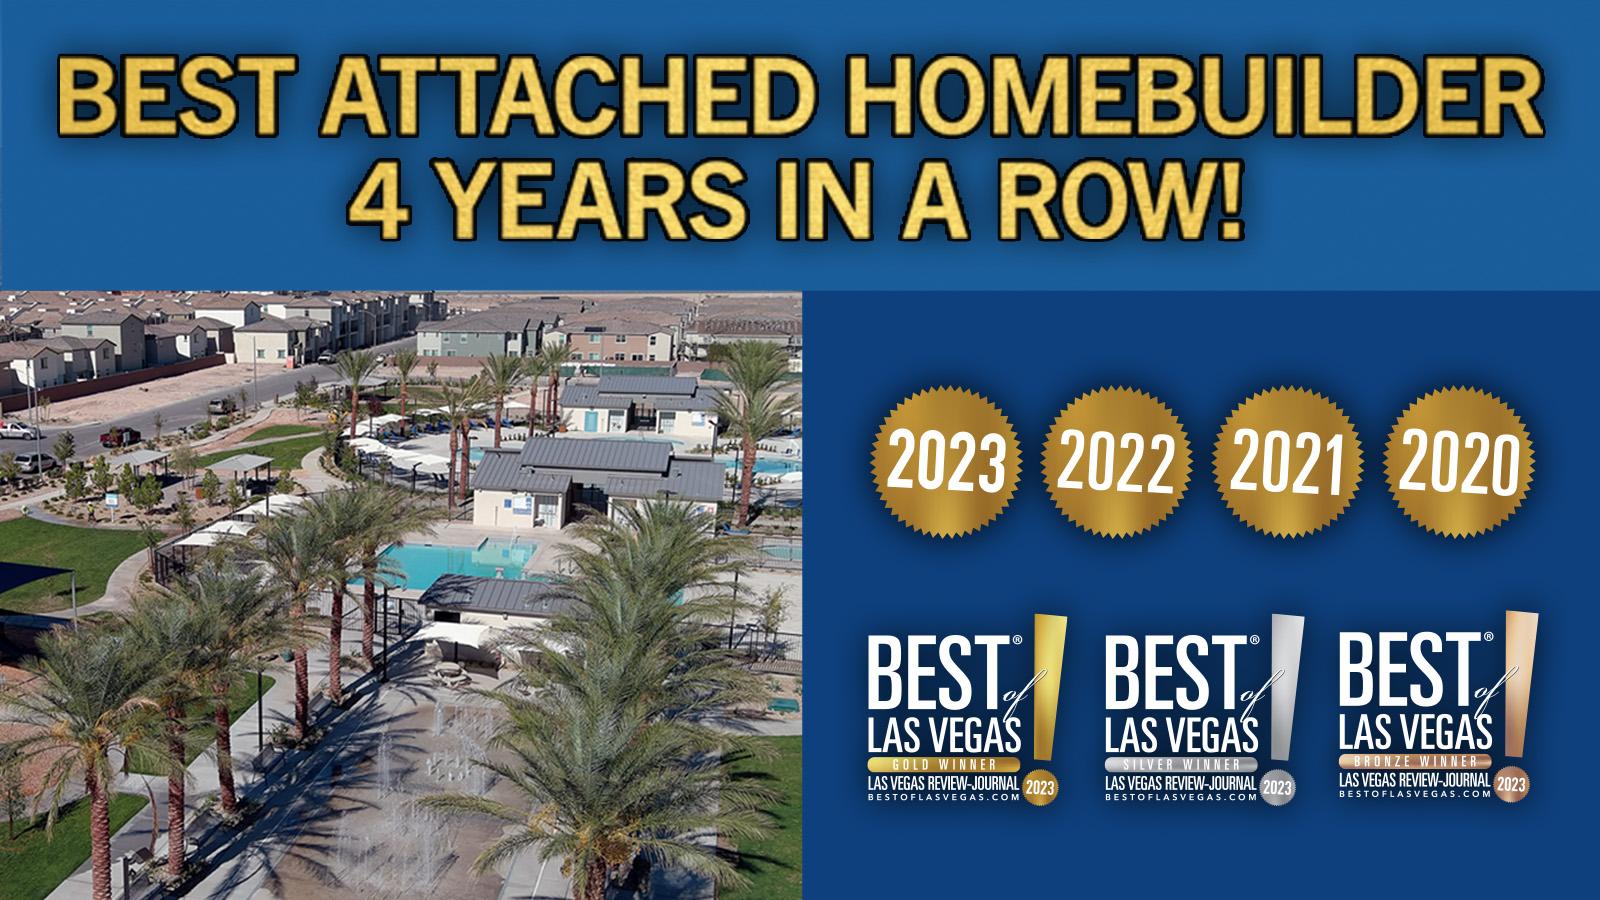 Hey, Las Vegas! We’re over the moon with gratitude! For the fourth consecutive year, we’ve proudly clinched GOLD as the Best Attached Homebuilder! Additionally, we’ve secured Bronze for Best Homebuilder- We appreciate the opportunity you have given us to build for you.